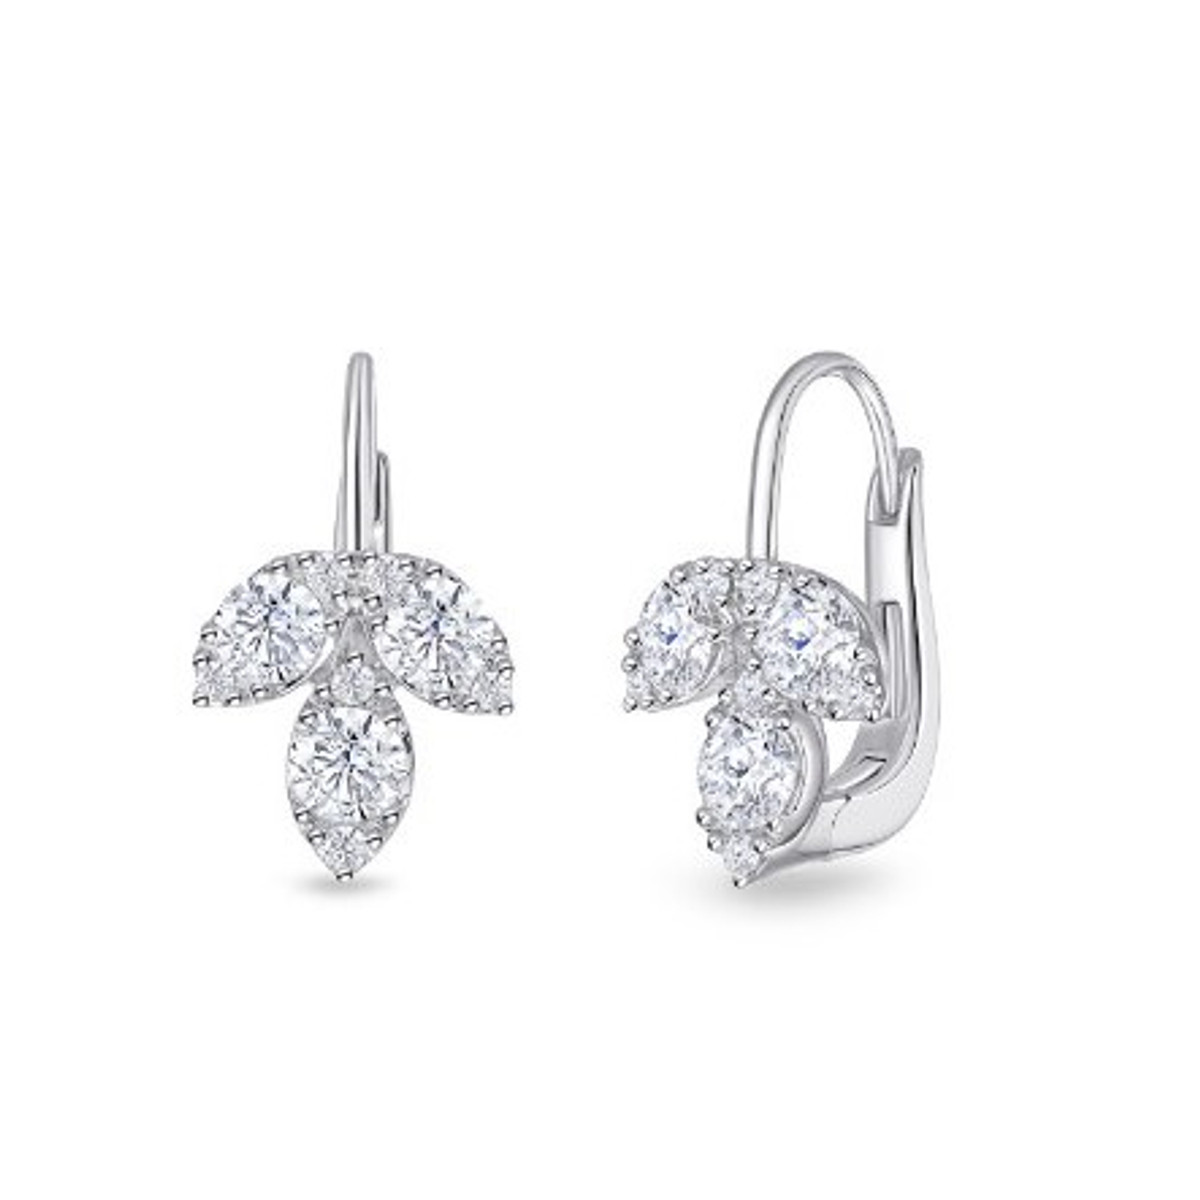 Hyde Park Collection 18K White Gold Diamond Petal Earrings-47886 Product Image